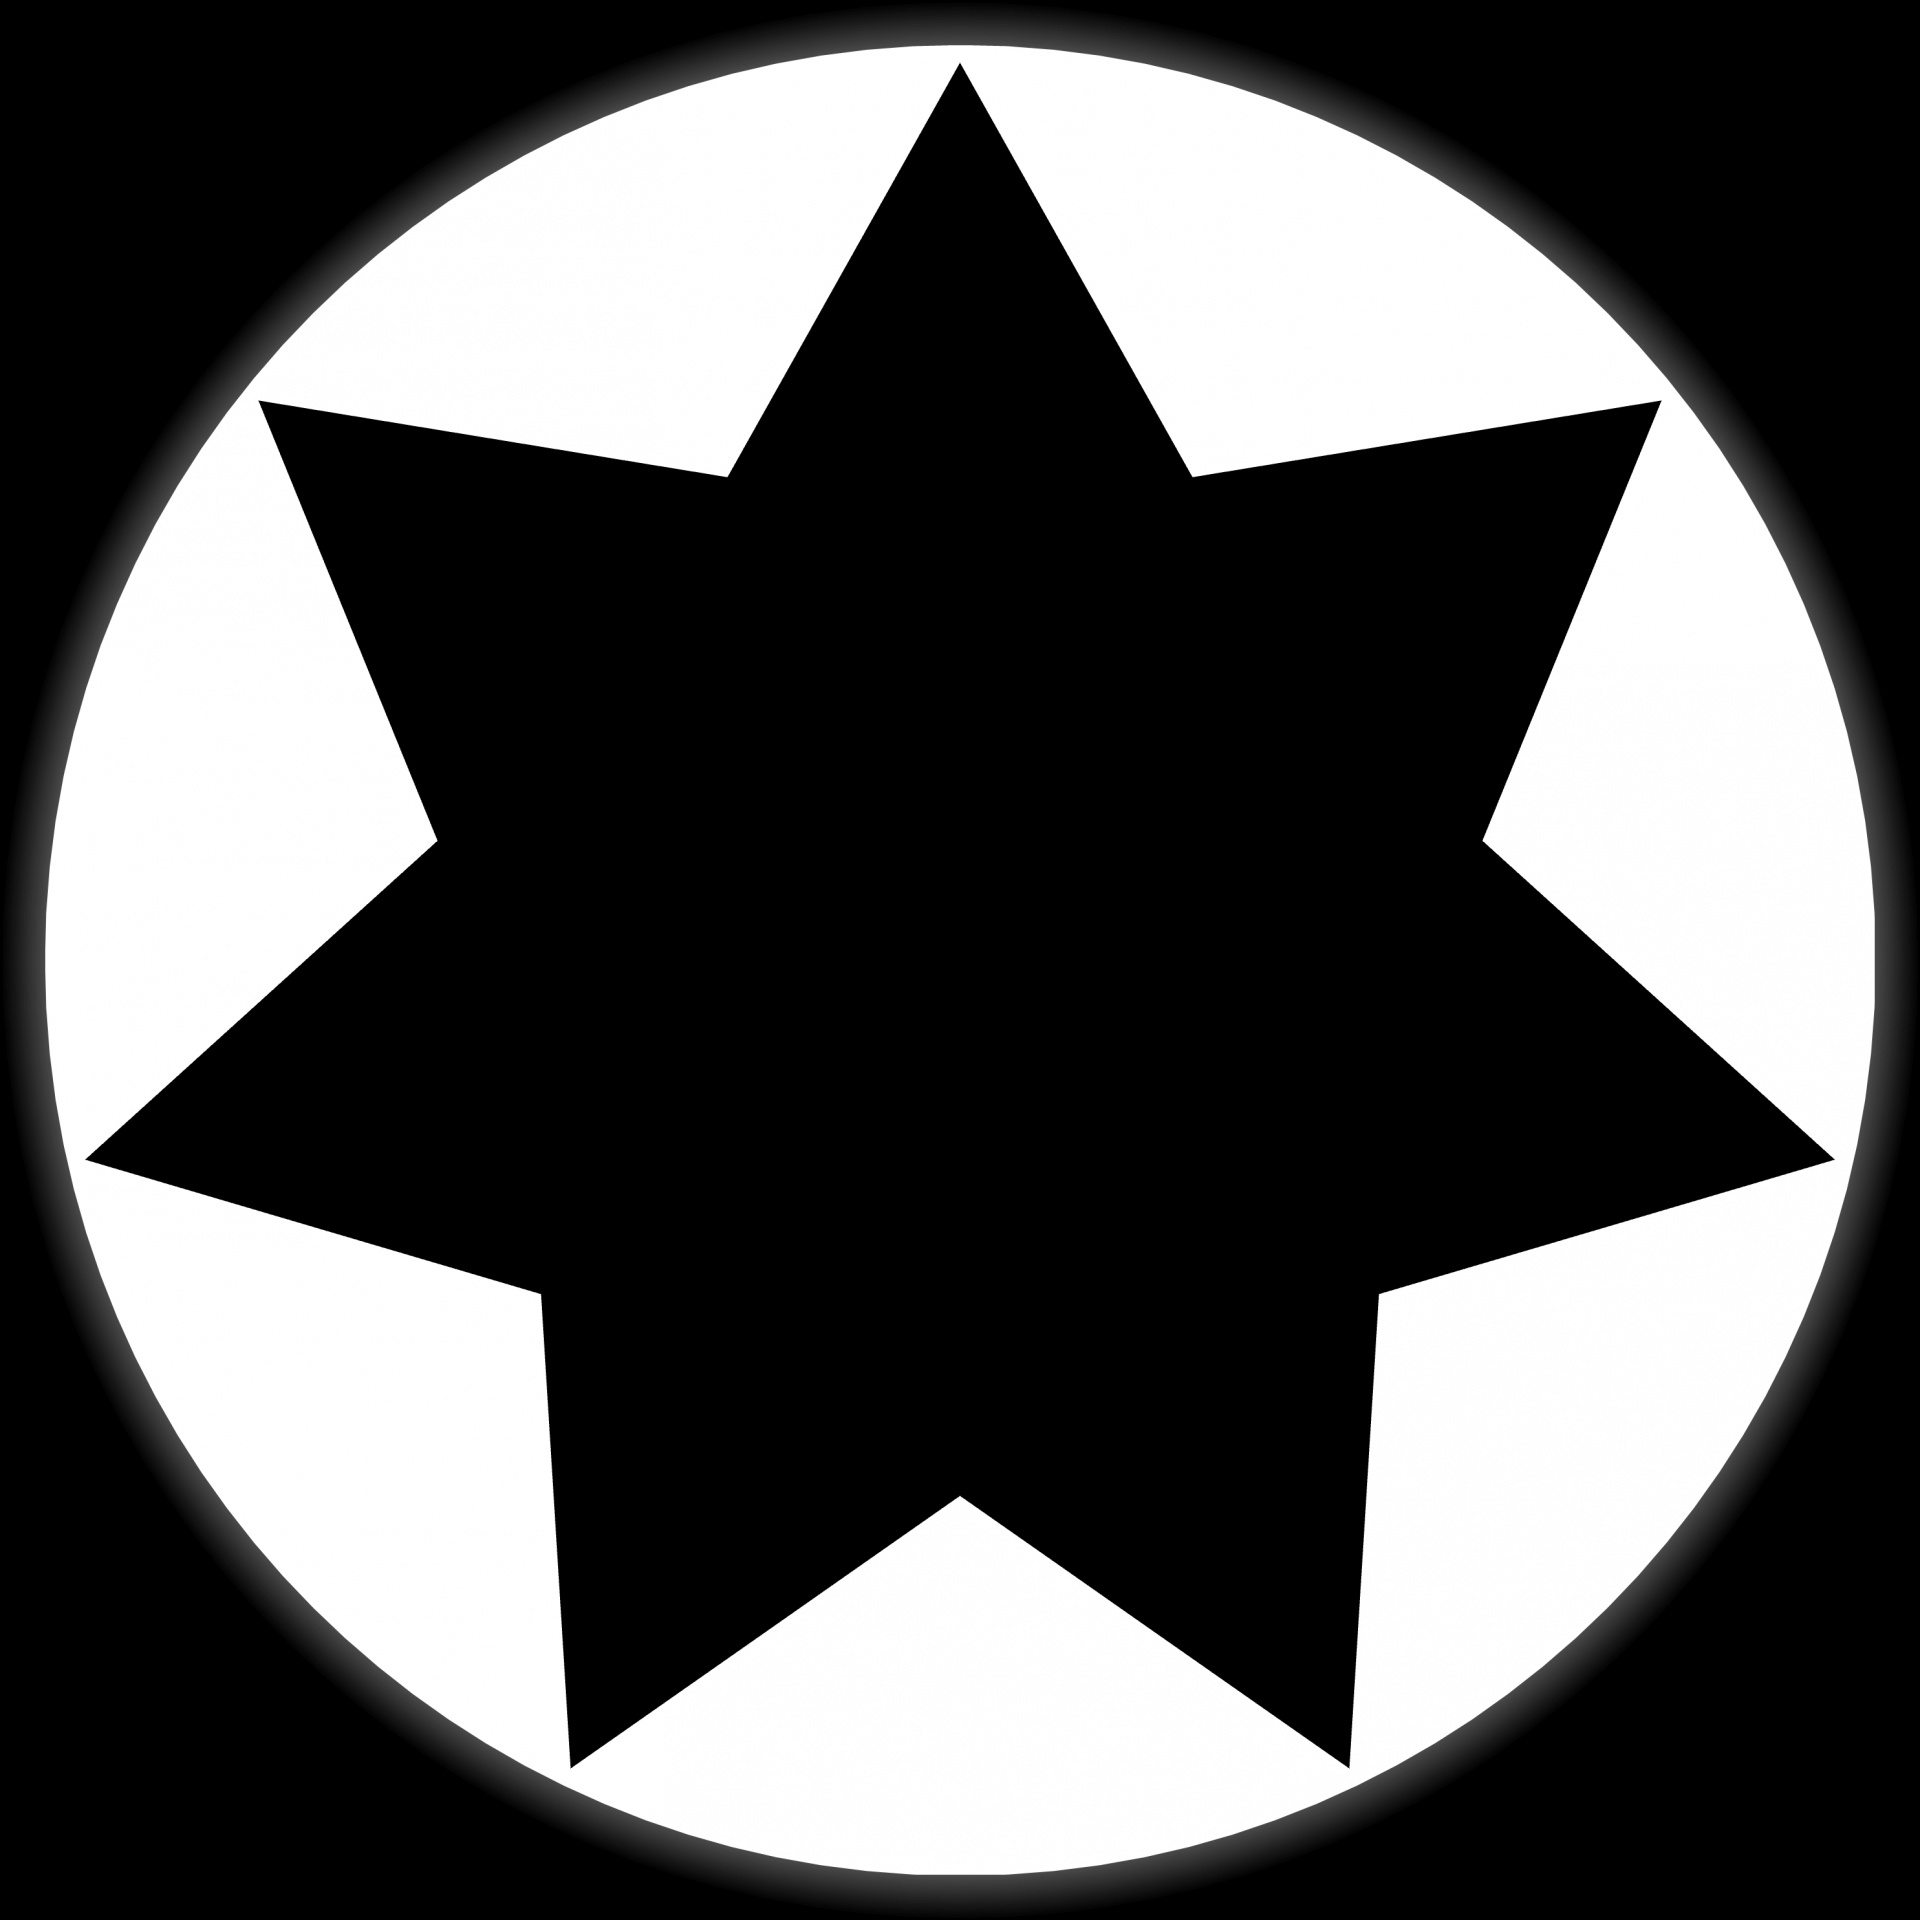 Digital computer graphic - abstract decorative seven-pointed star heptagon in a circle in a black and white colors. The Author - Peshkareva Irina